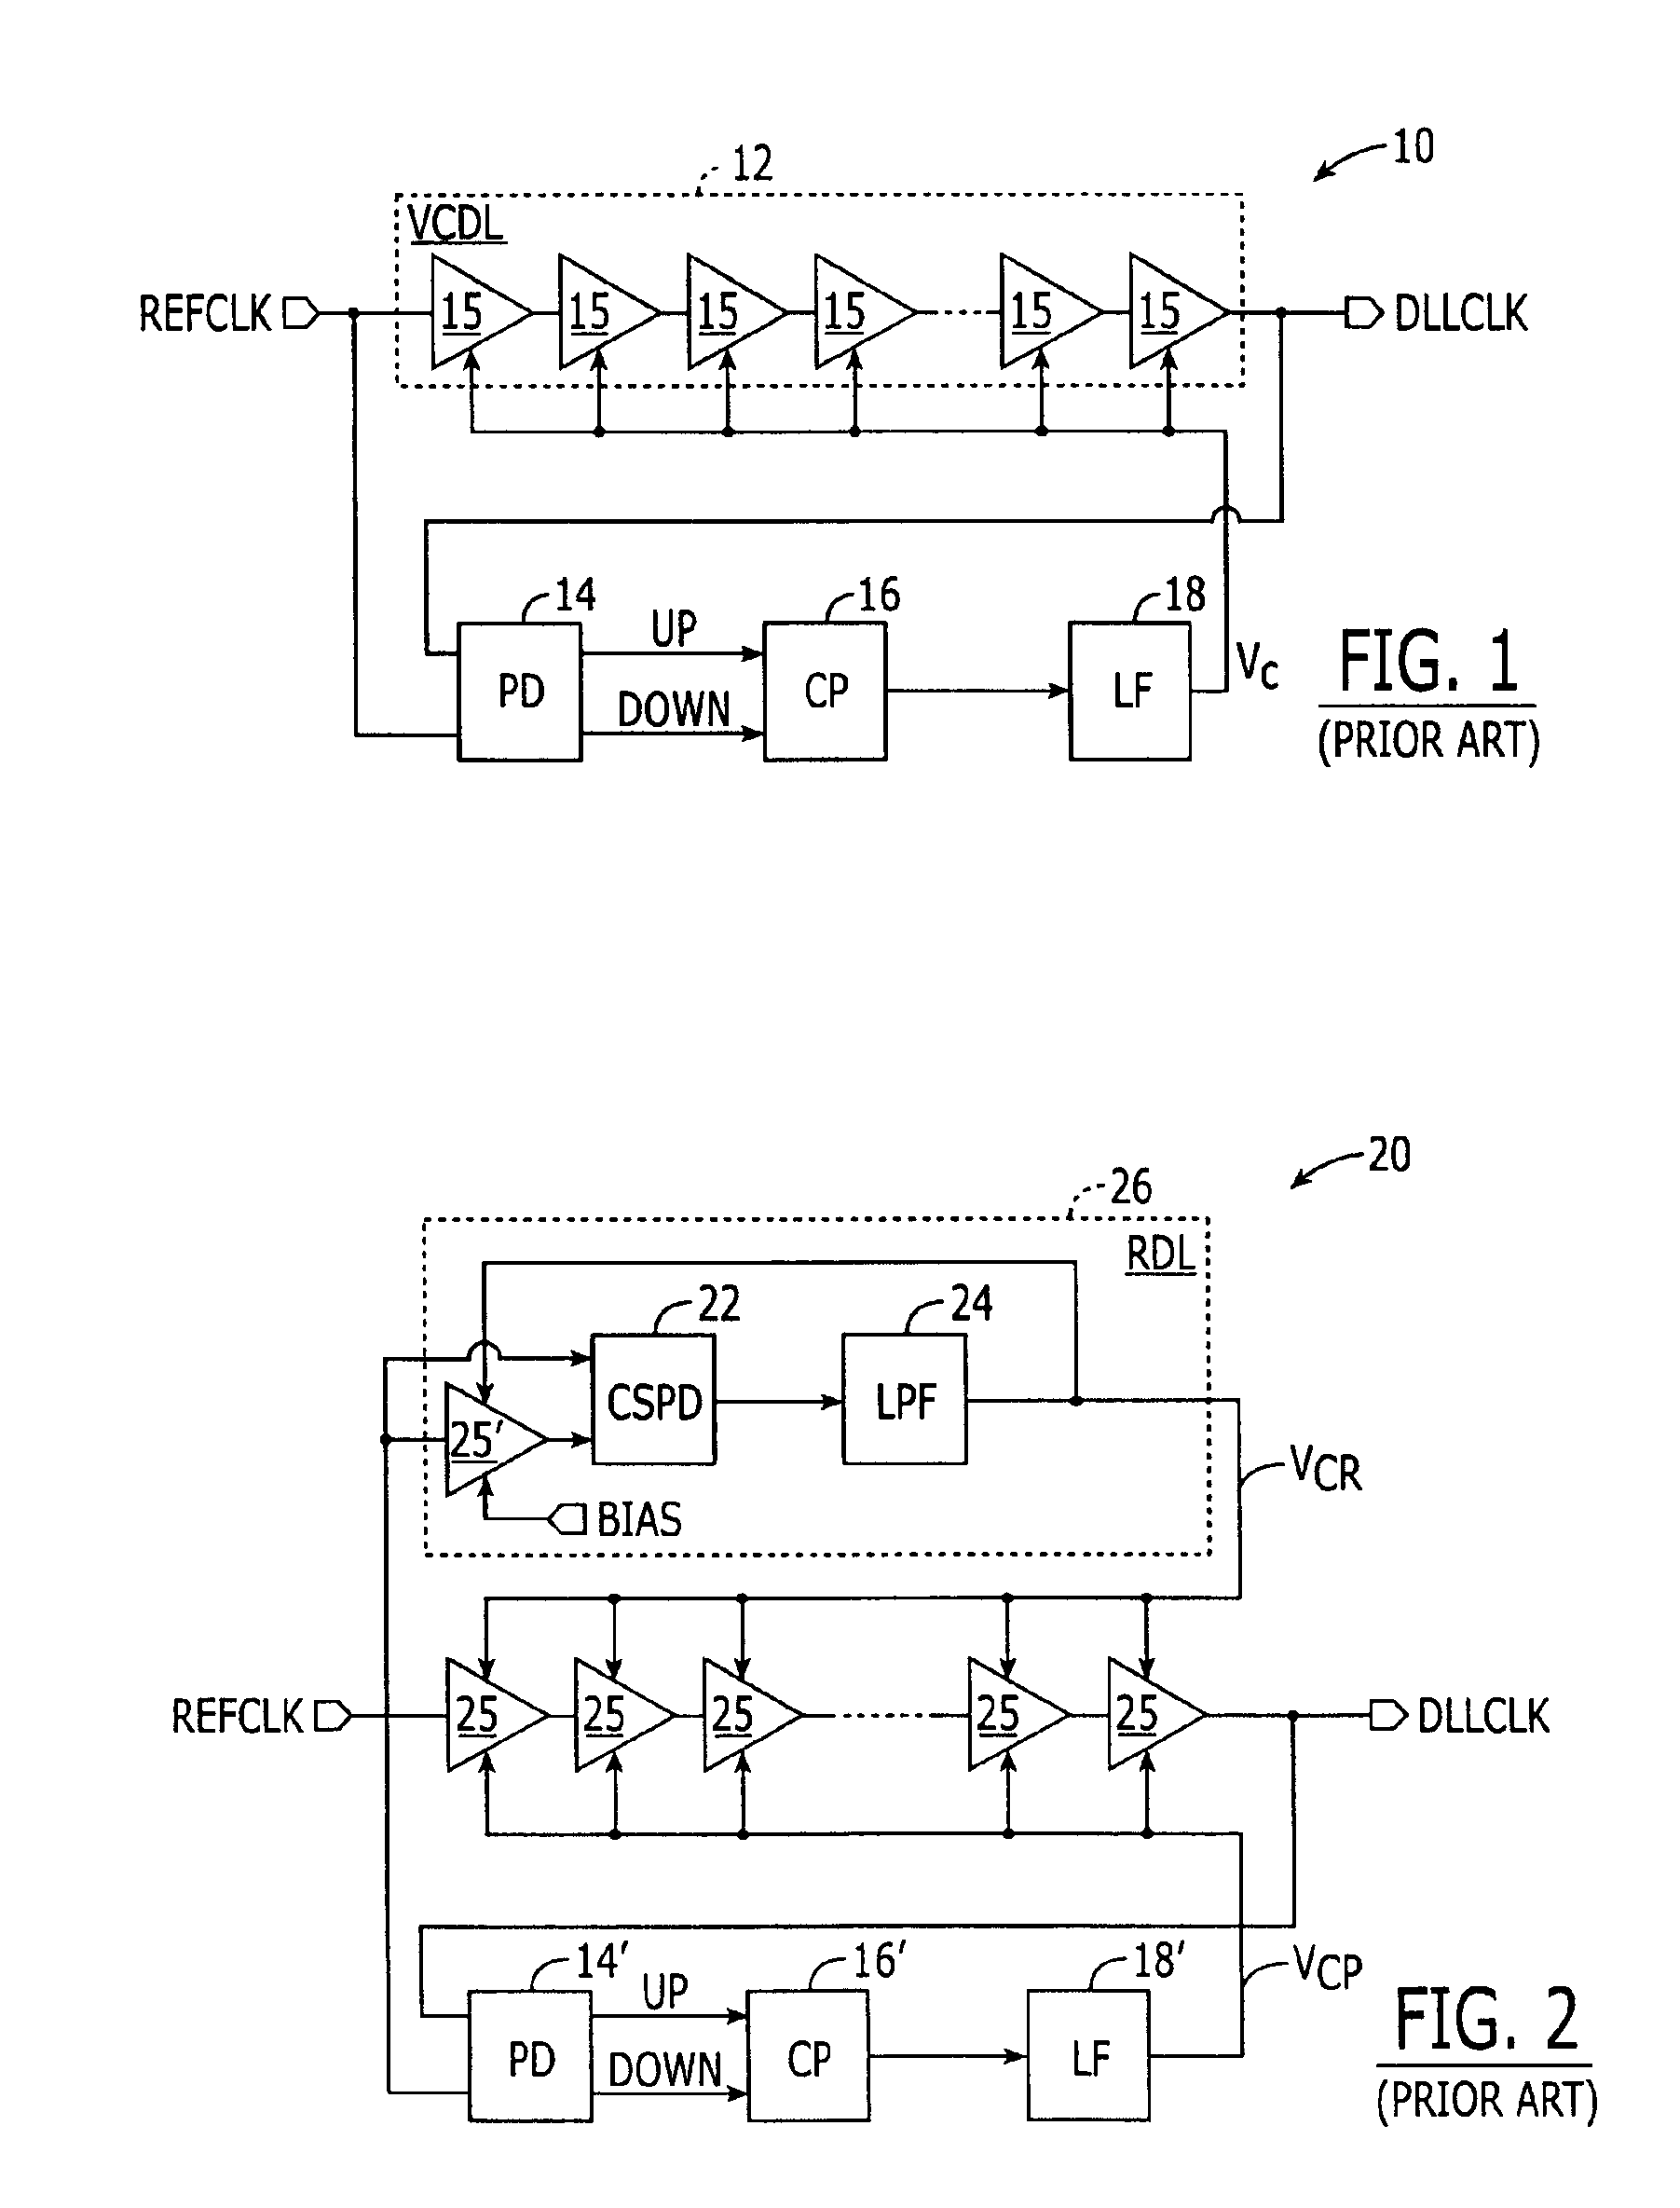 Delay-locked loop (DLL) integrated circuits having high bandwidth and reliable locking characteristics